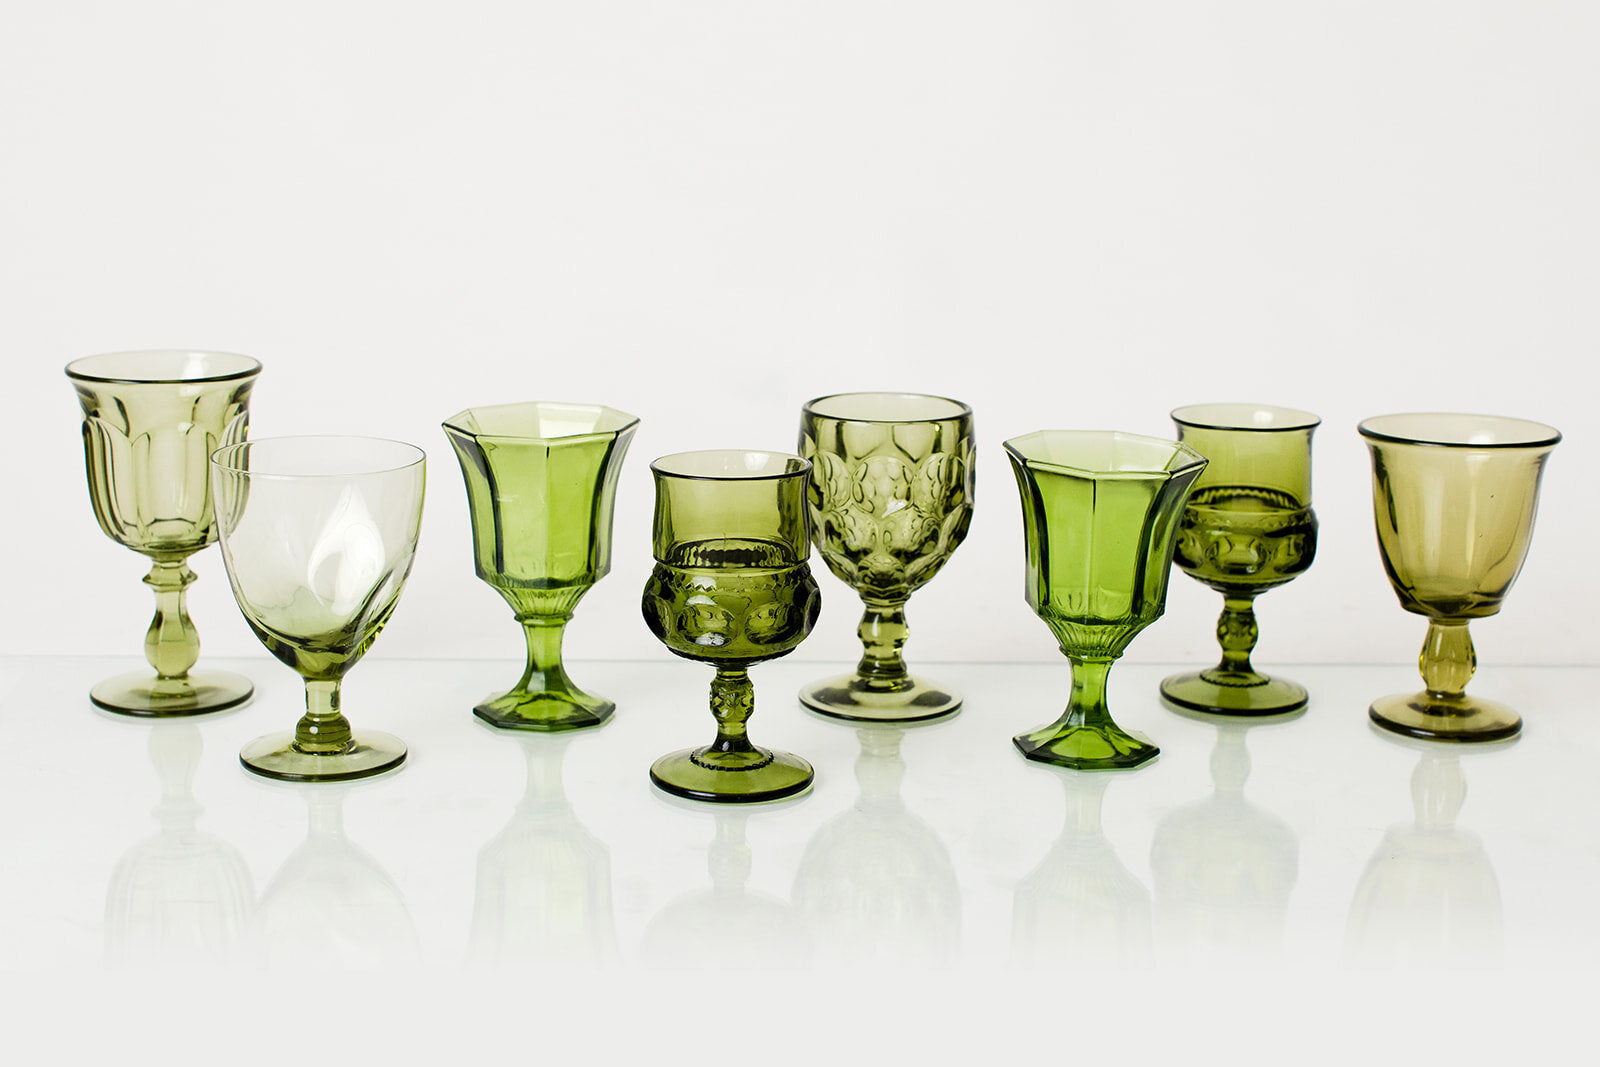 Vintage Glassware: Tips for Cleaning, Displaying, and Preserving Your Collection